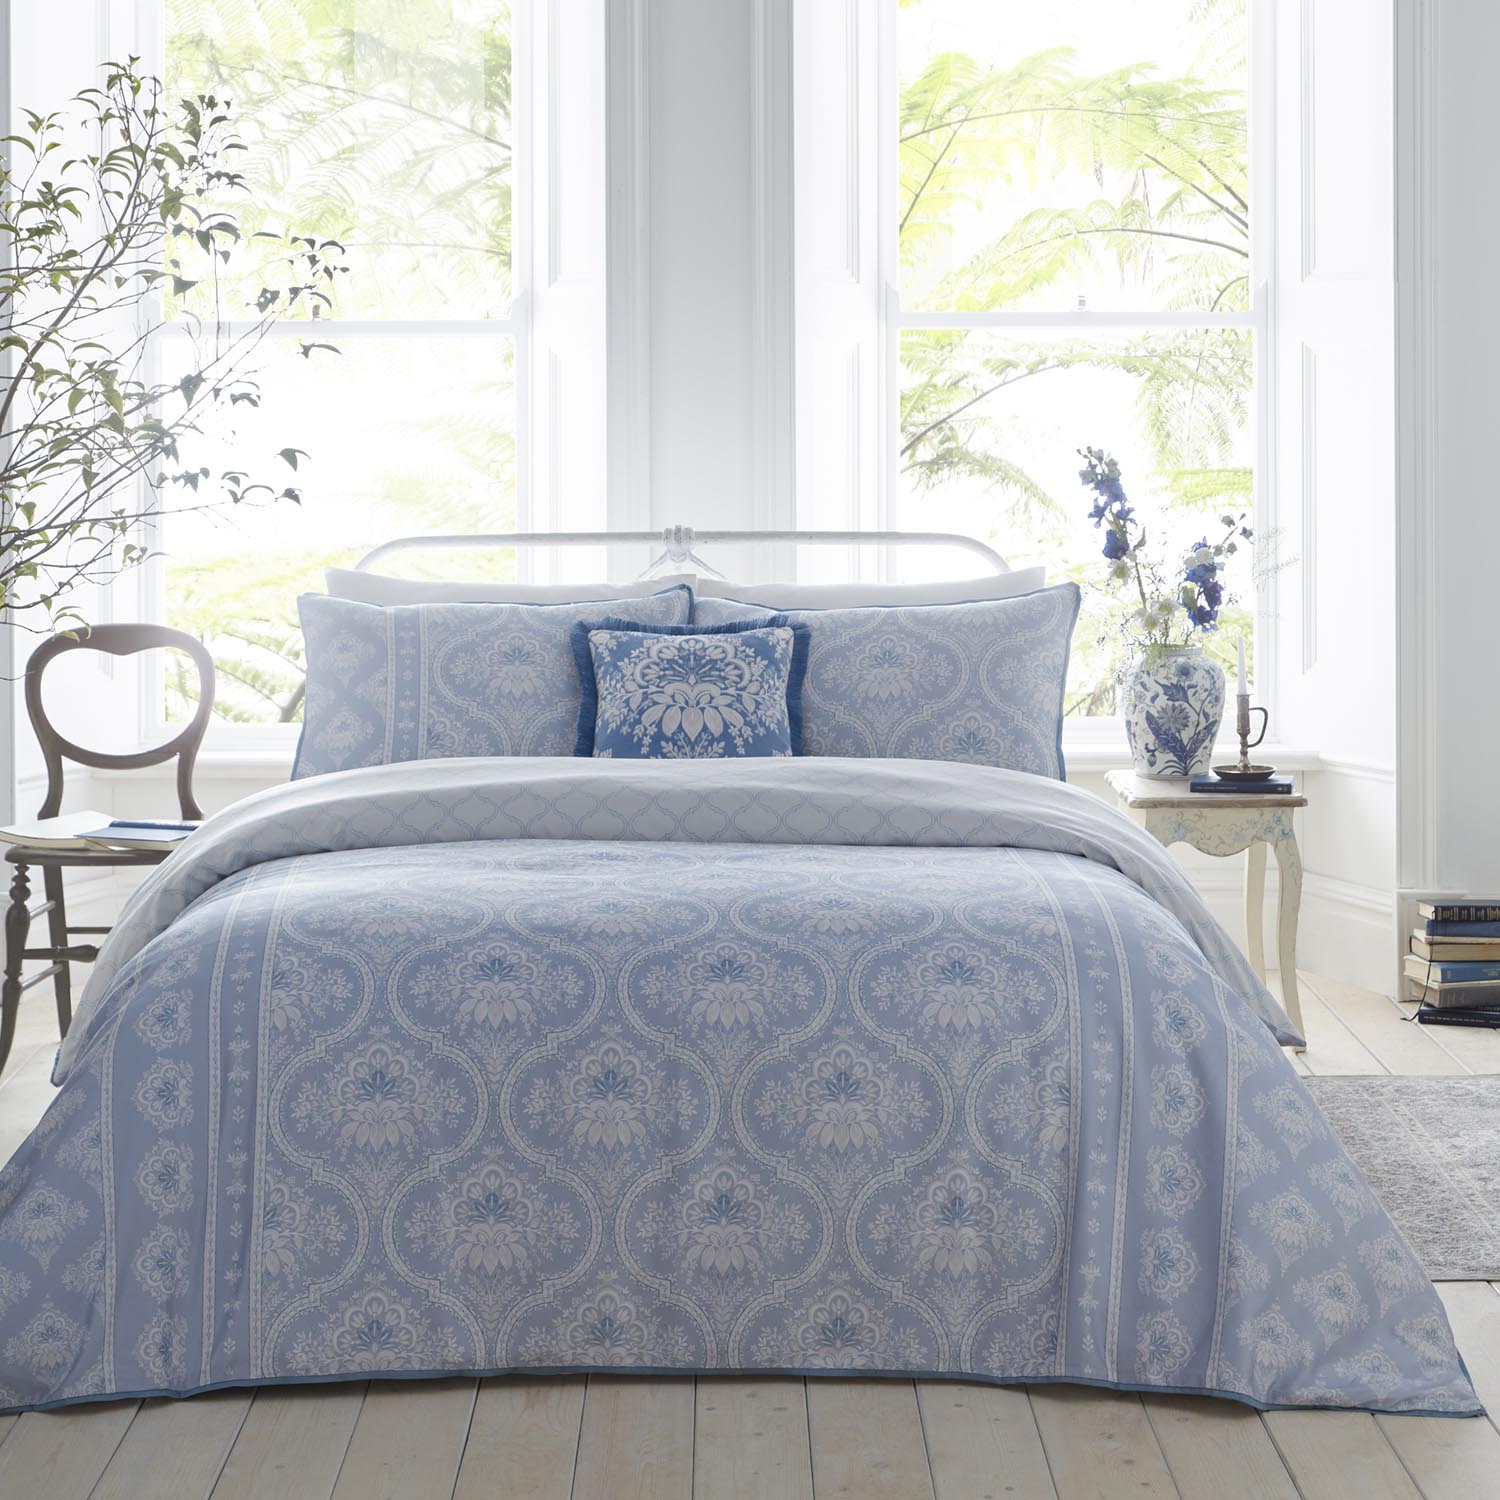  Heather And Ferne Alexandria Blue Duvet Cover Set 1 Shaws Department Stores